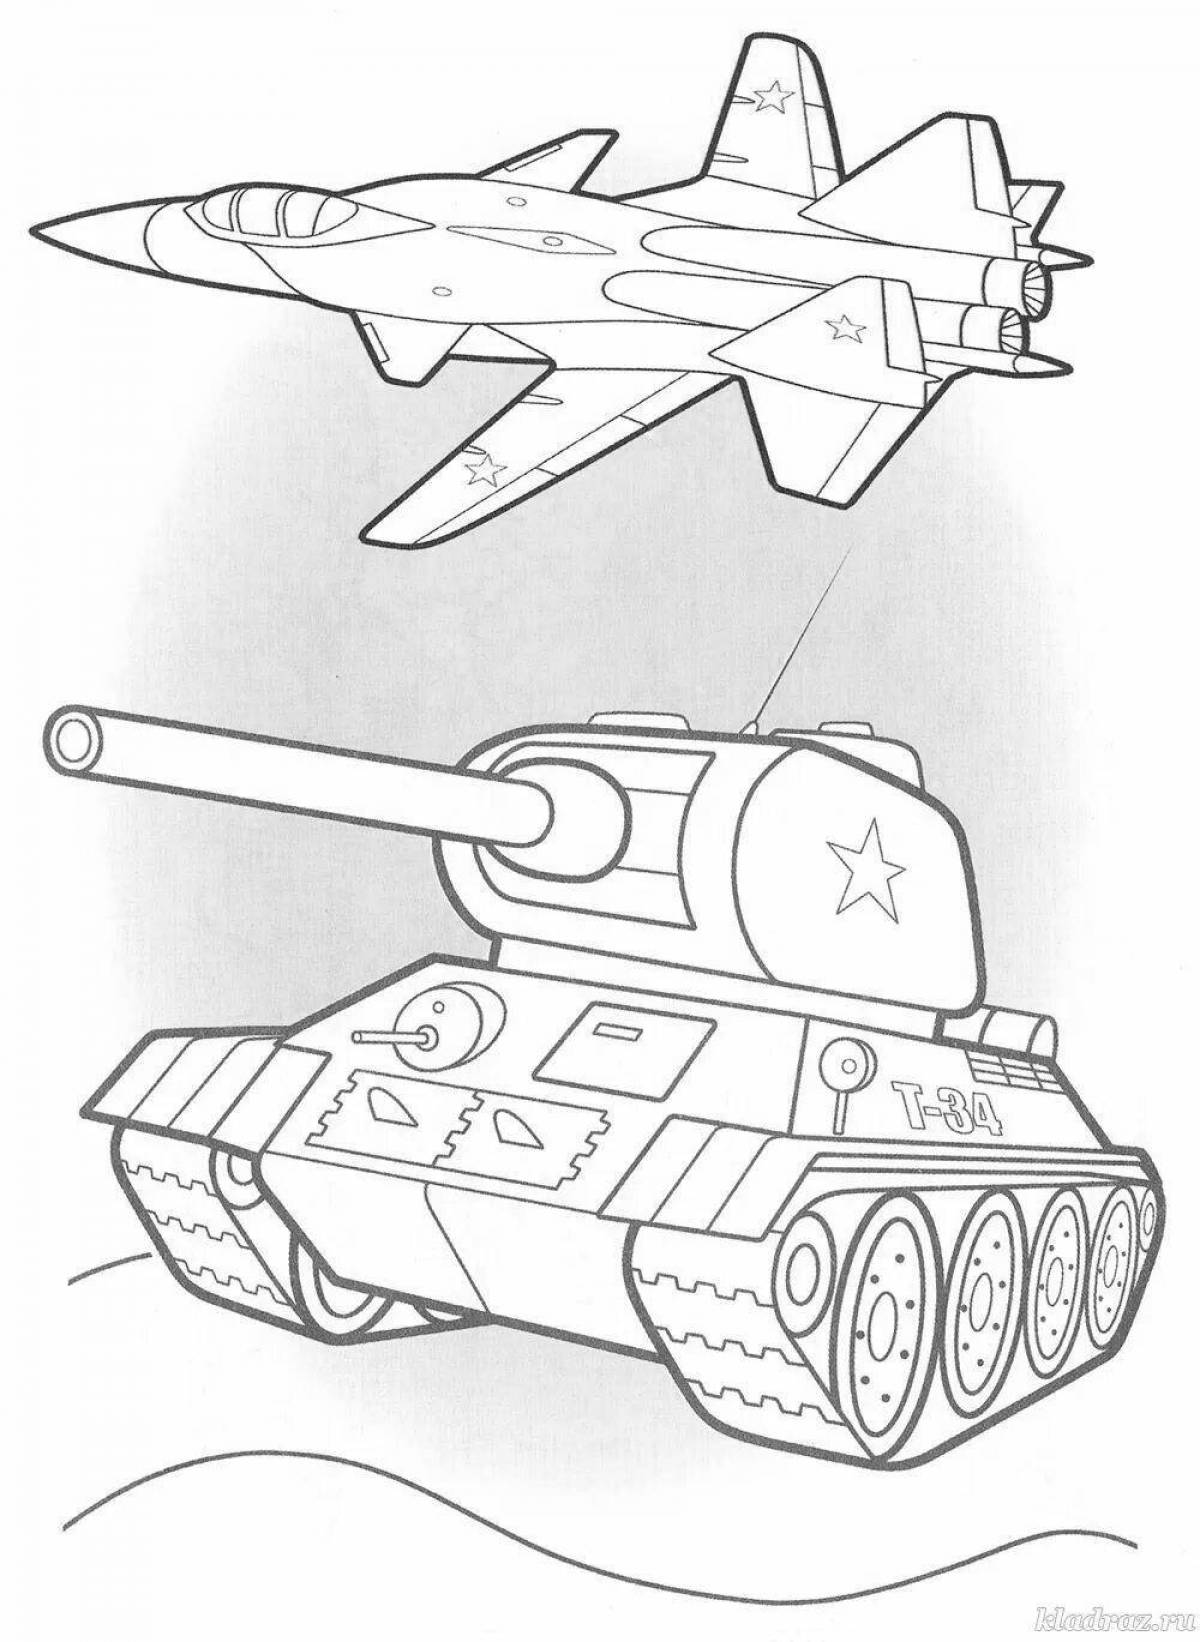 Glorious military vehicle coloring book for preschool children